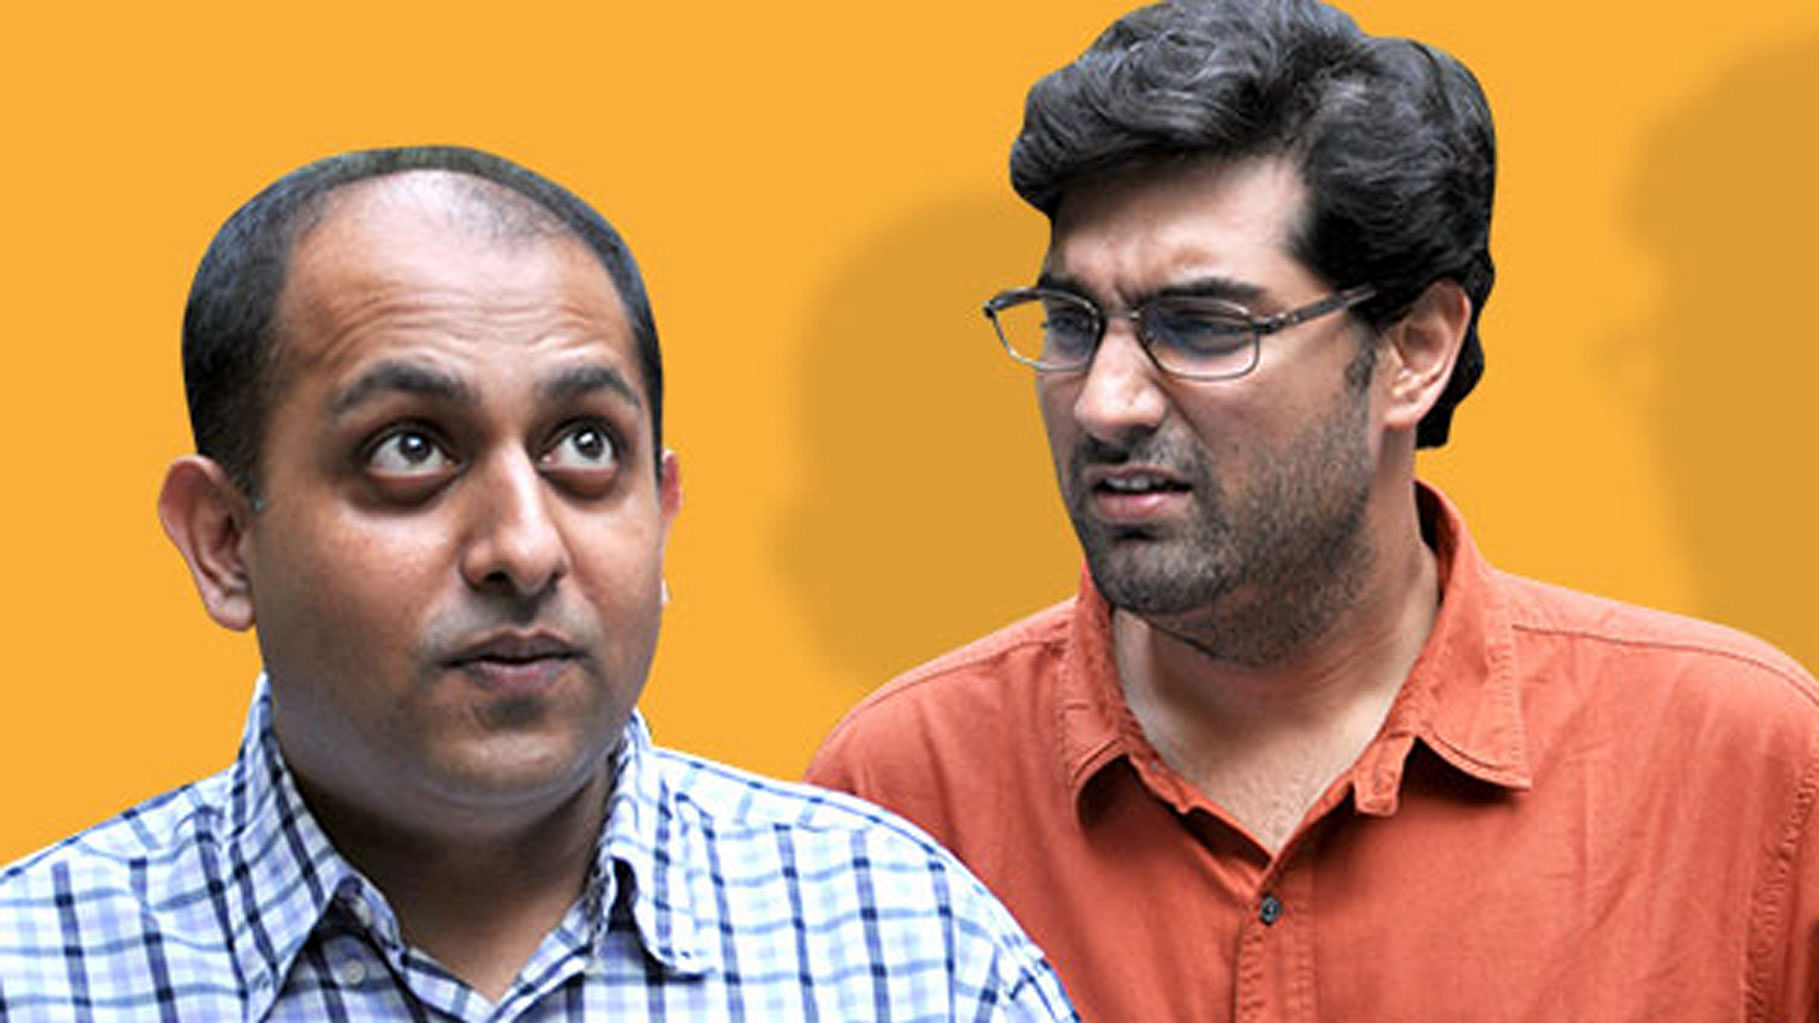 Join this candid chat with the funny guys Anuvab Pal and Kunaal Roy Kapur (Photo: <a href="http://www.audiomatic.in/category/our-last-week/">Audiomatic</a>)